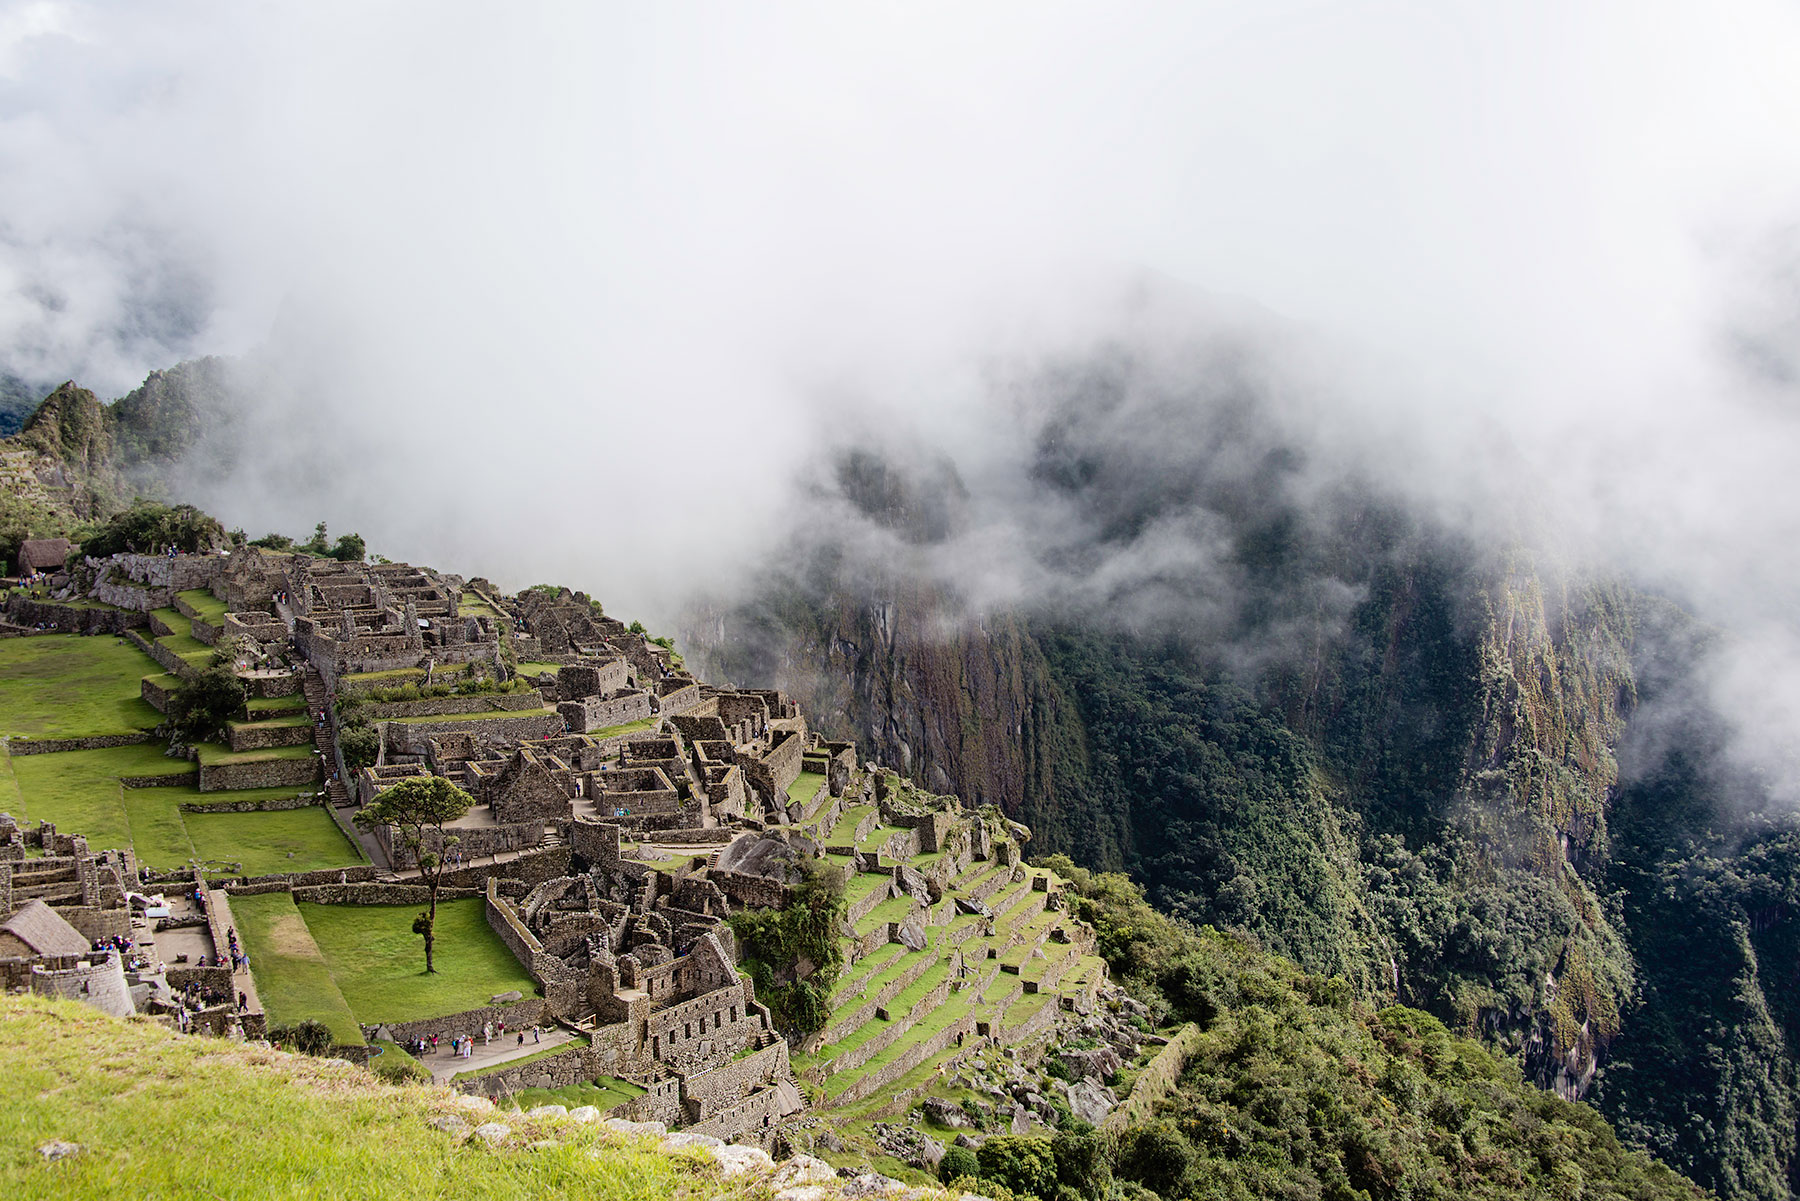 Overview of Machu Picchu city in the clouds